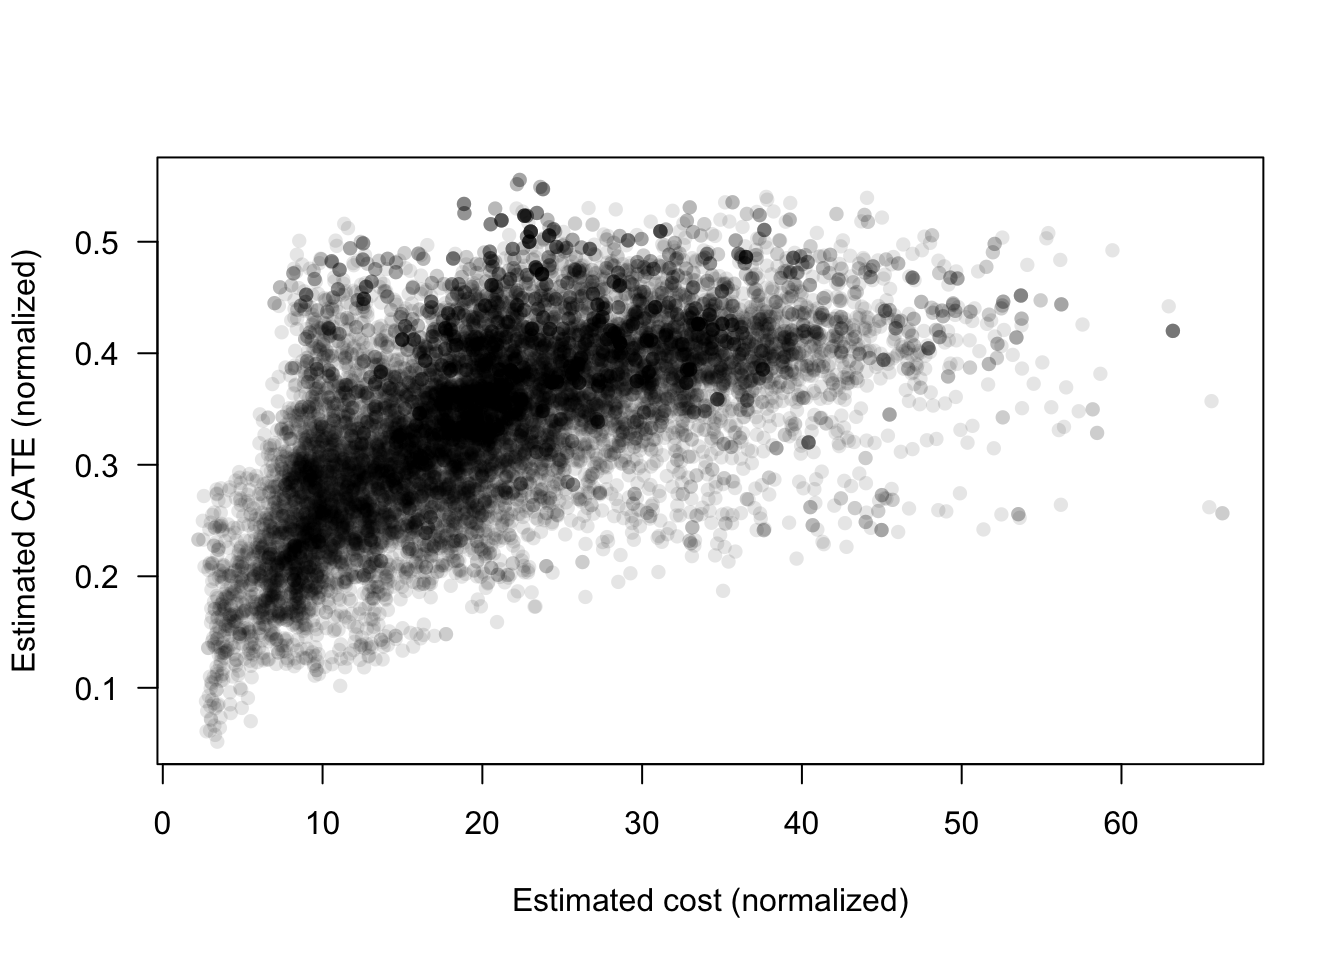 Estimated cost and estimated CATE